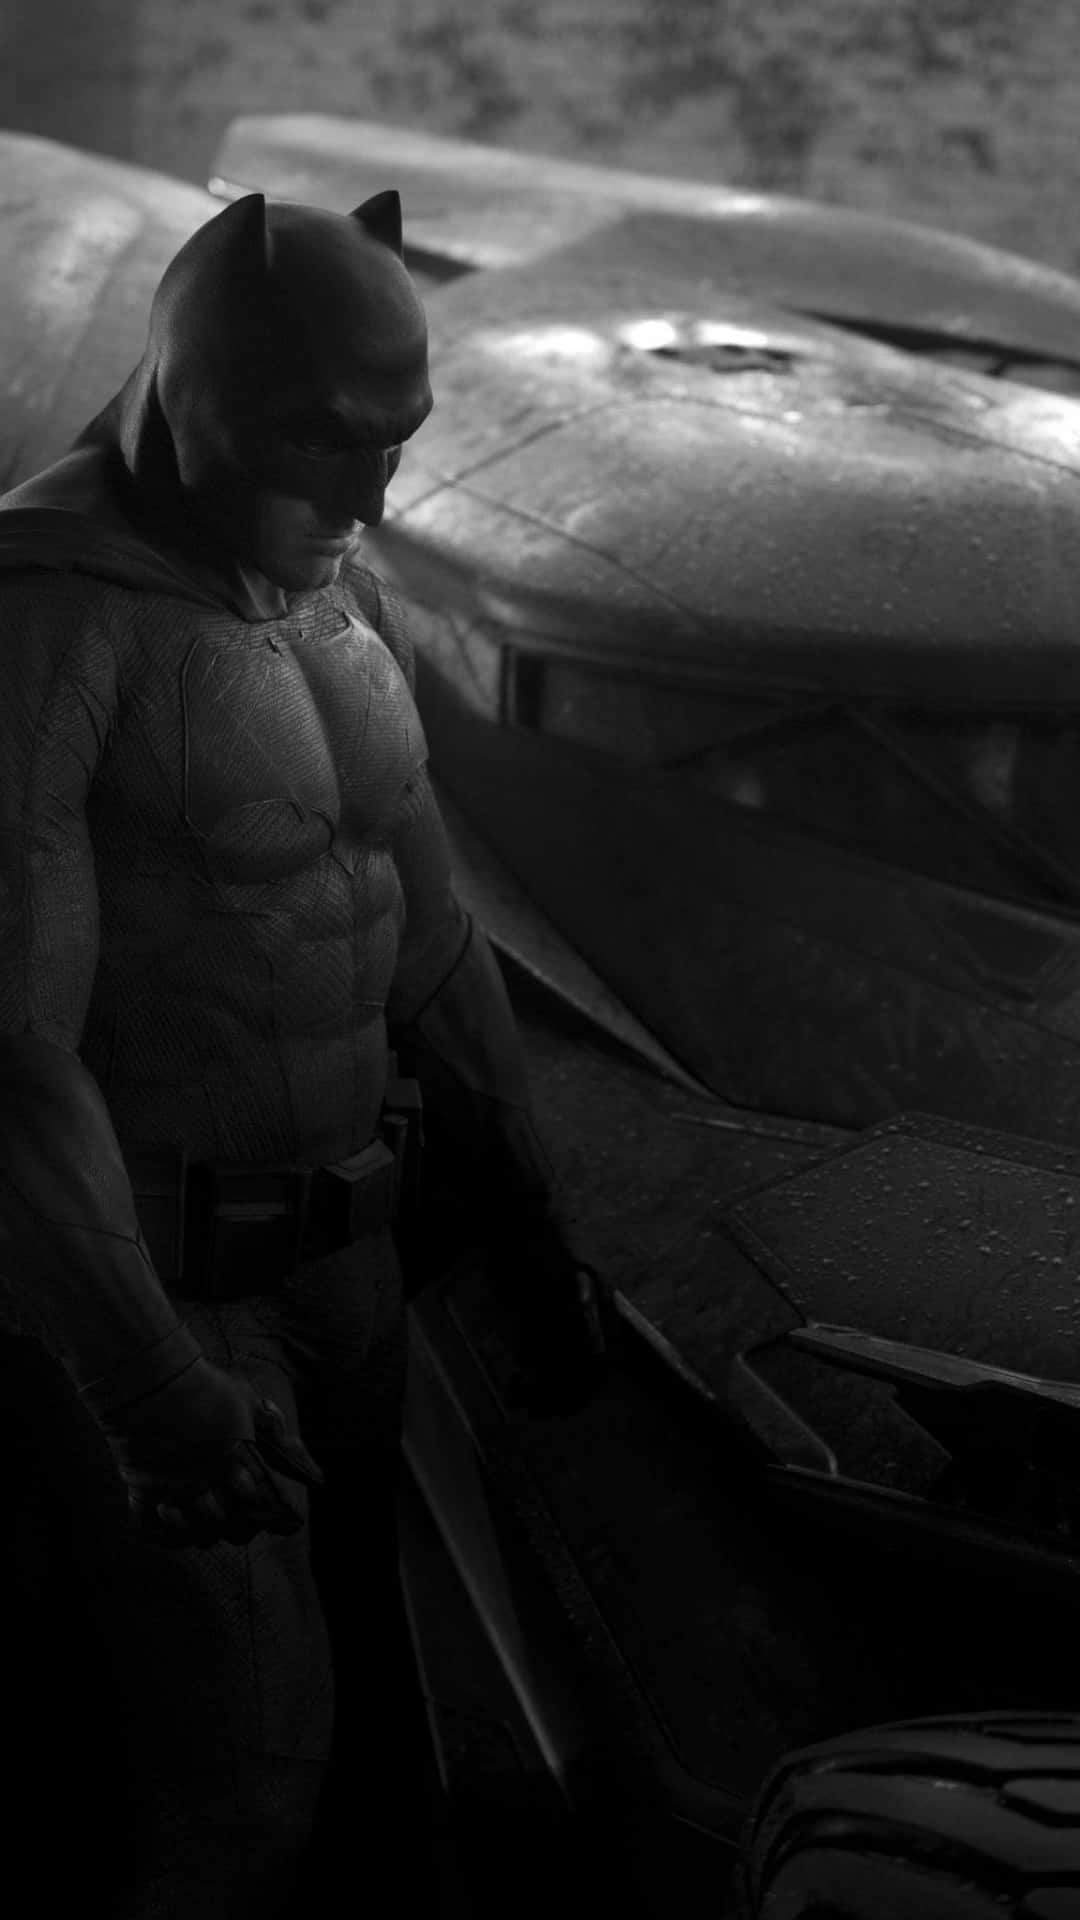 Get Some Caped Crusader Style With This Awesome Batman Iphone Wallpaper